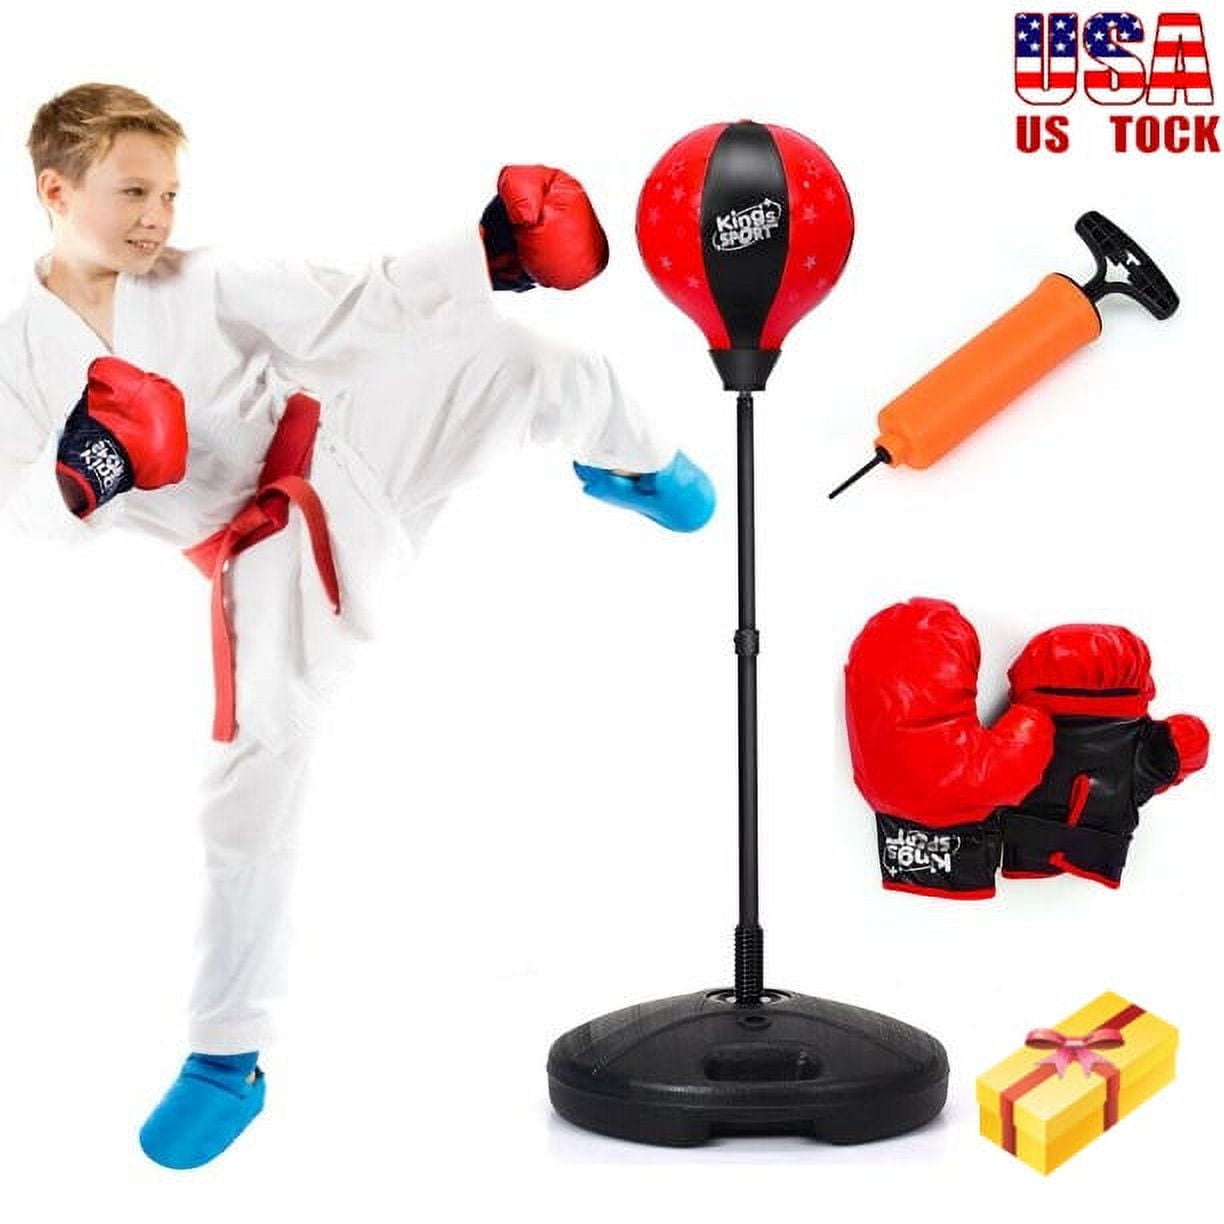 KMUYSL Punching Bag for Kids, Boxing Bag with Gloves, Height Adjustable  Punching Bag for Age 5, 6, 7, 8 9 10+ Years Old Boys Girls, Ideal Chritsmas